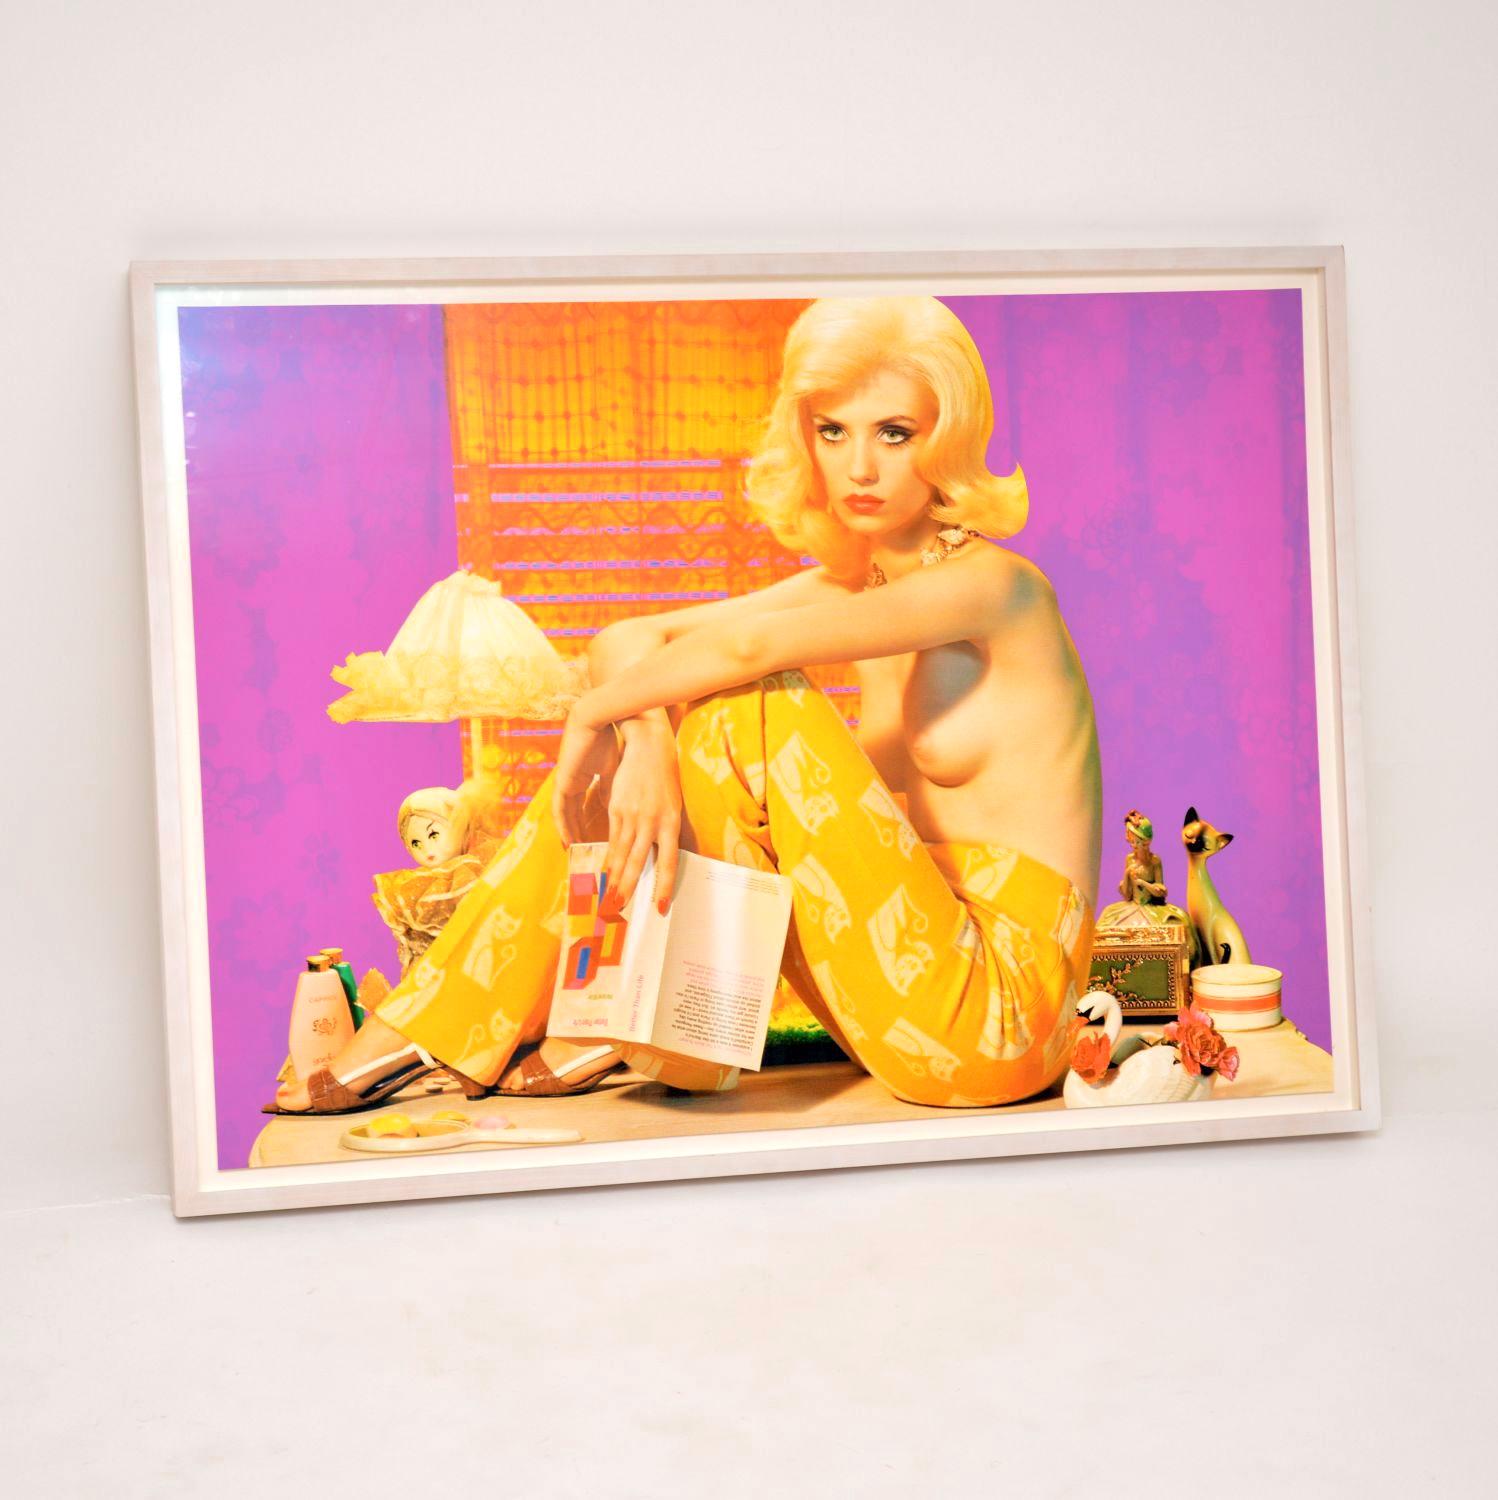 A fabulous limited edition screen print by the famous British artist Miles Aldridge. This is one of a limited run of only thirteen made in 2017, it is number 3/13, signed and numbered by the artist on the back.

Aldridge’s prints are highly-staged